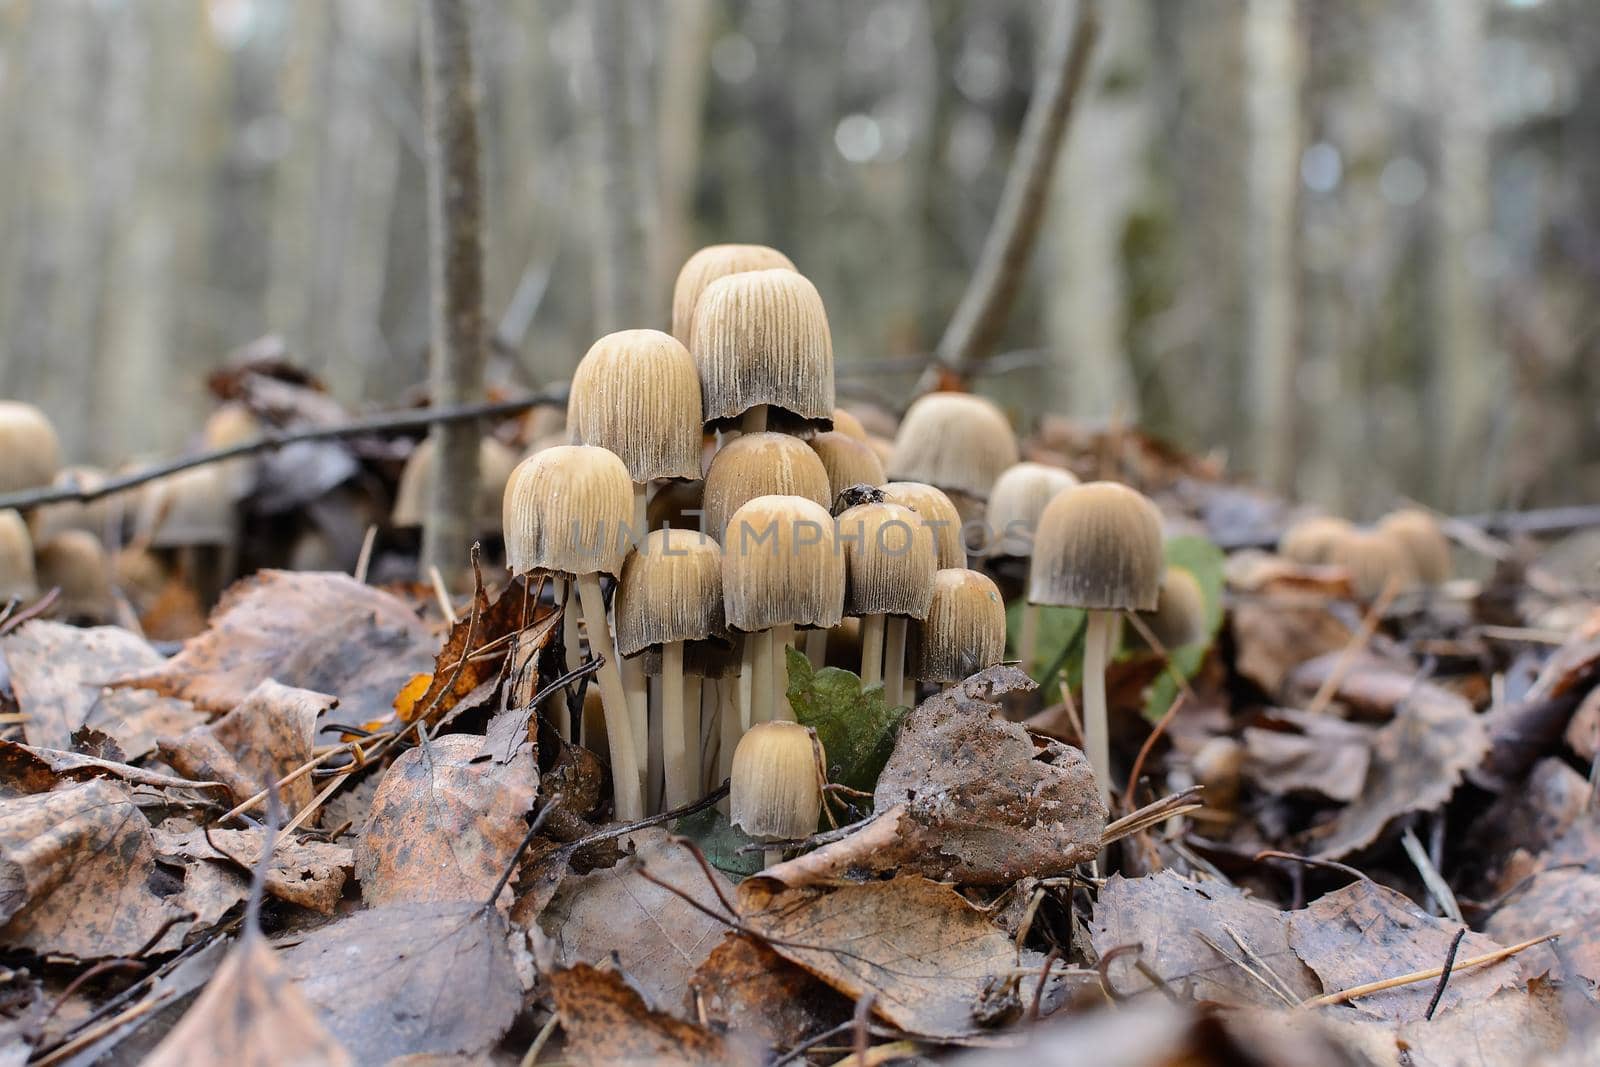 Group of fungus Coprinus in dry leaves in autumn forest